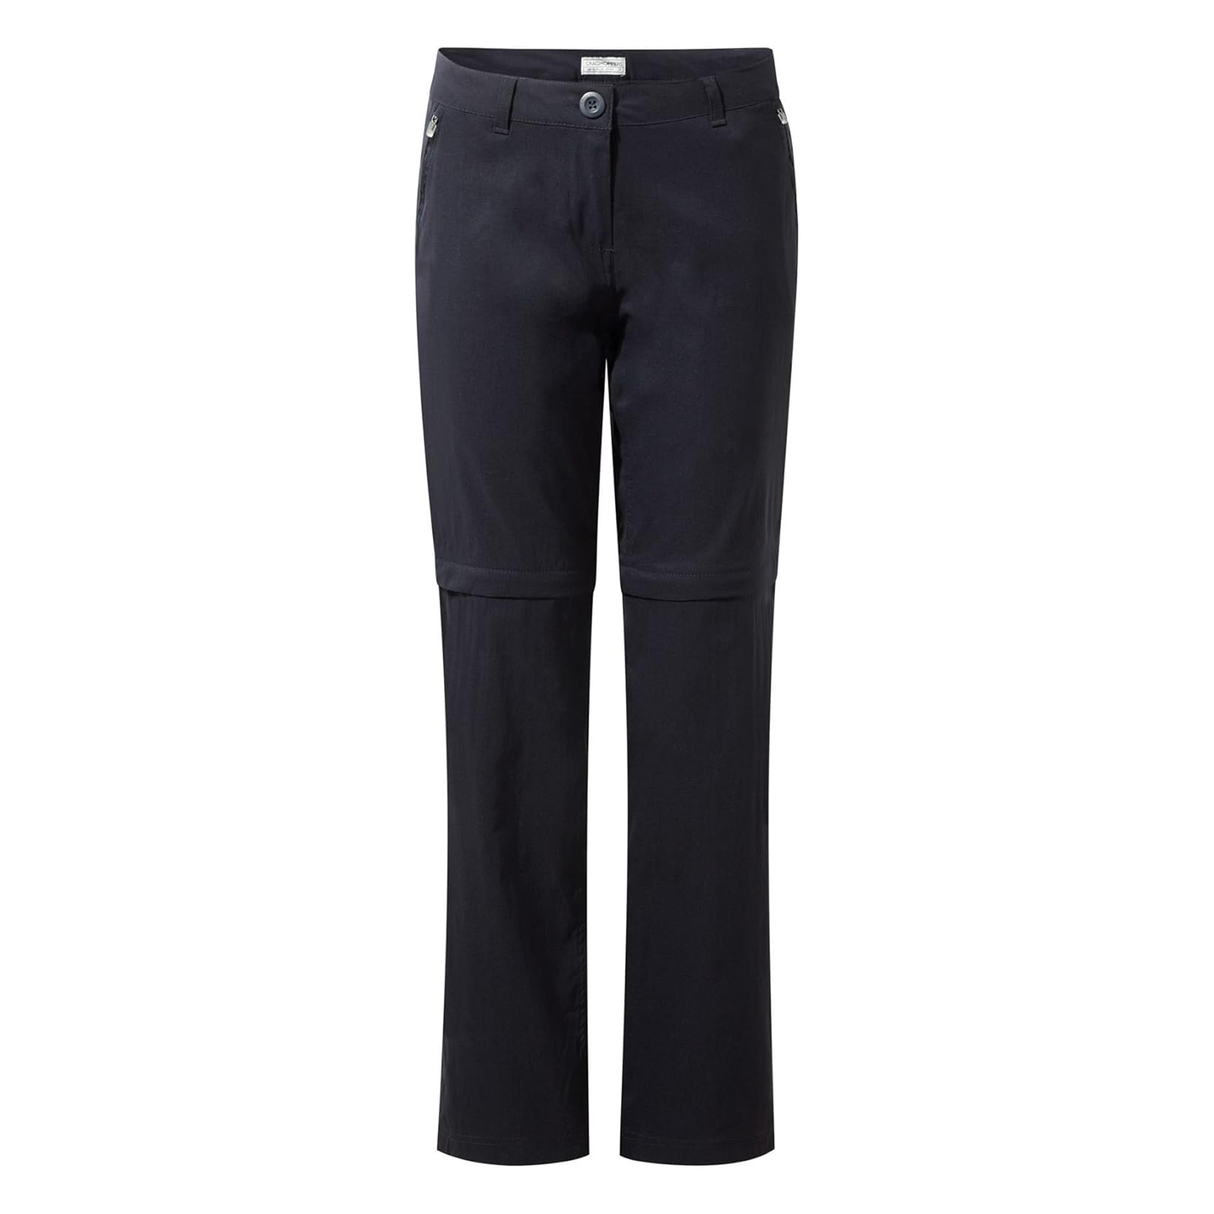 Craghoppers Womens Kiwi Pro Converitible Stretch Trousers